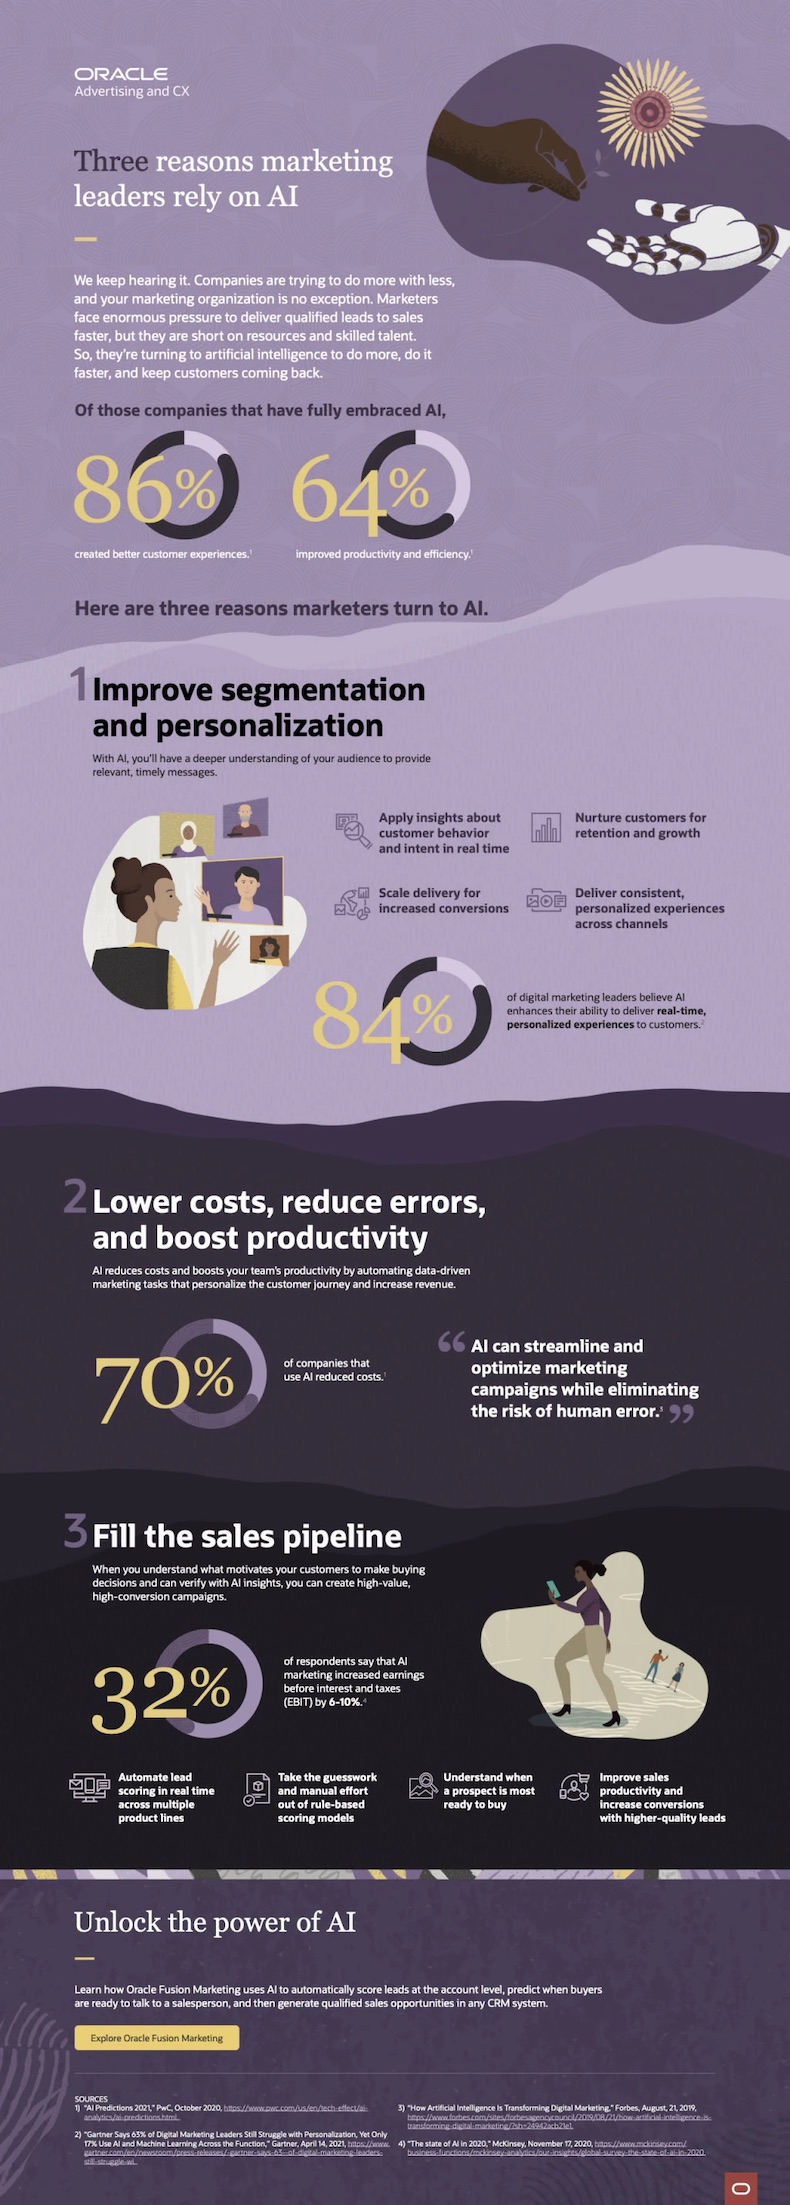 why marketers rely on ai | infographic – marketingprofs.com